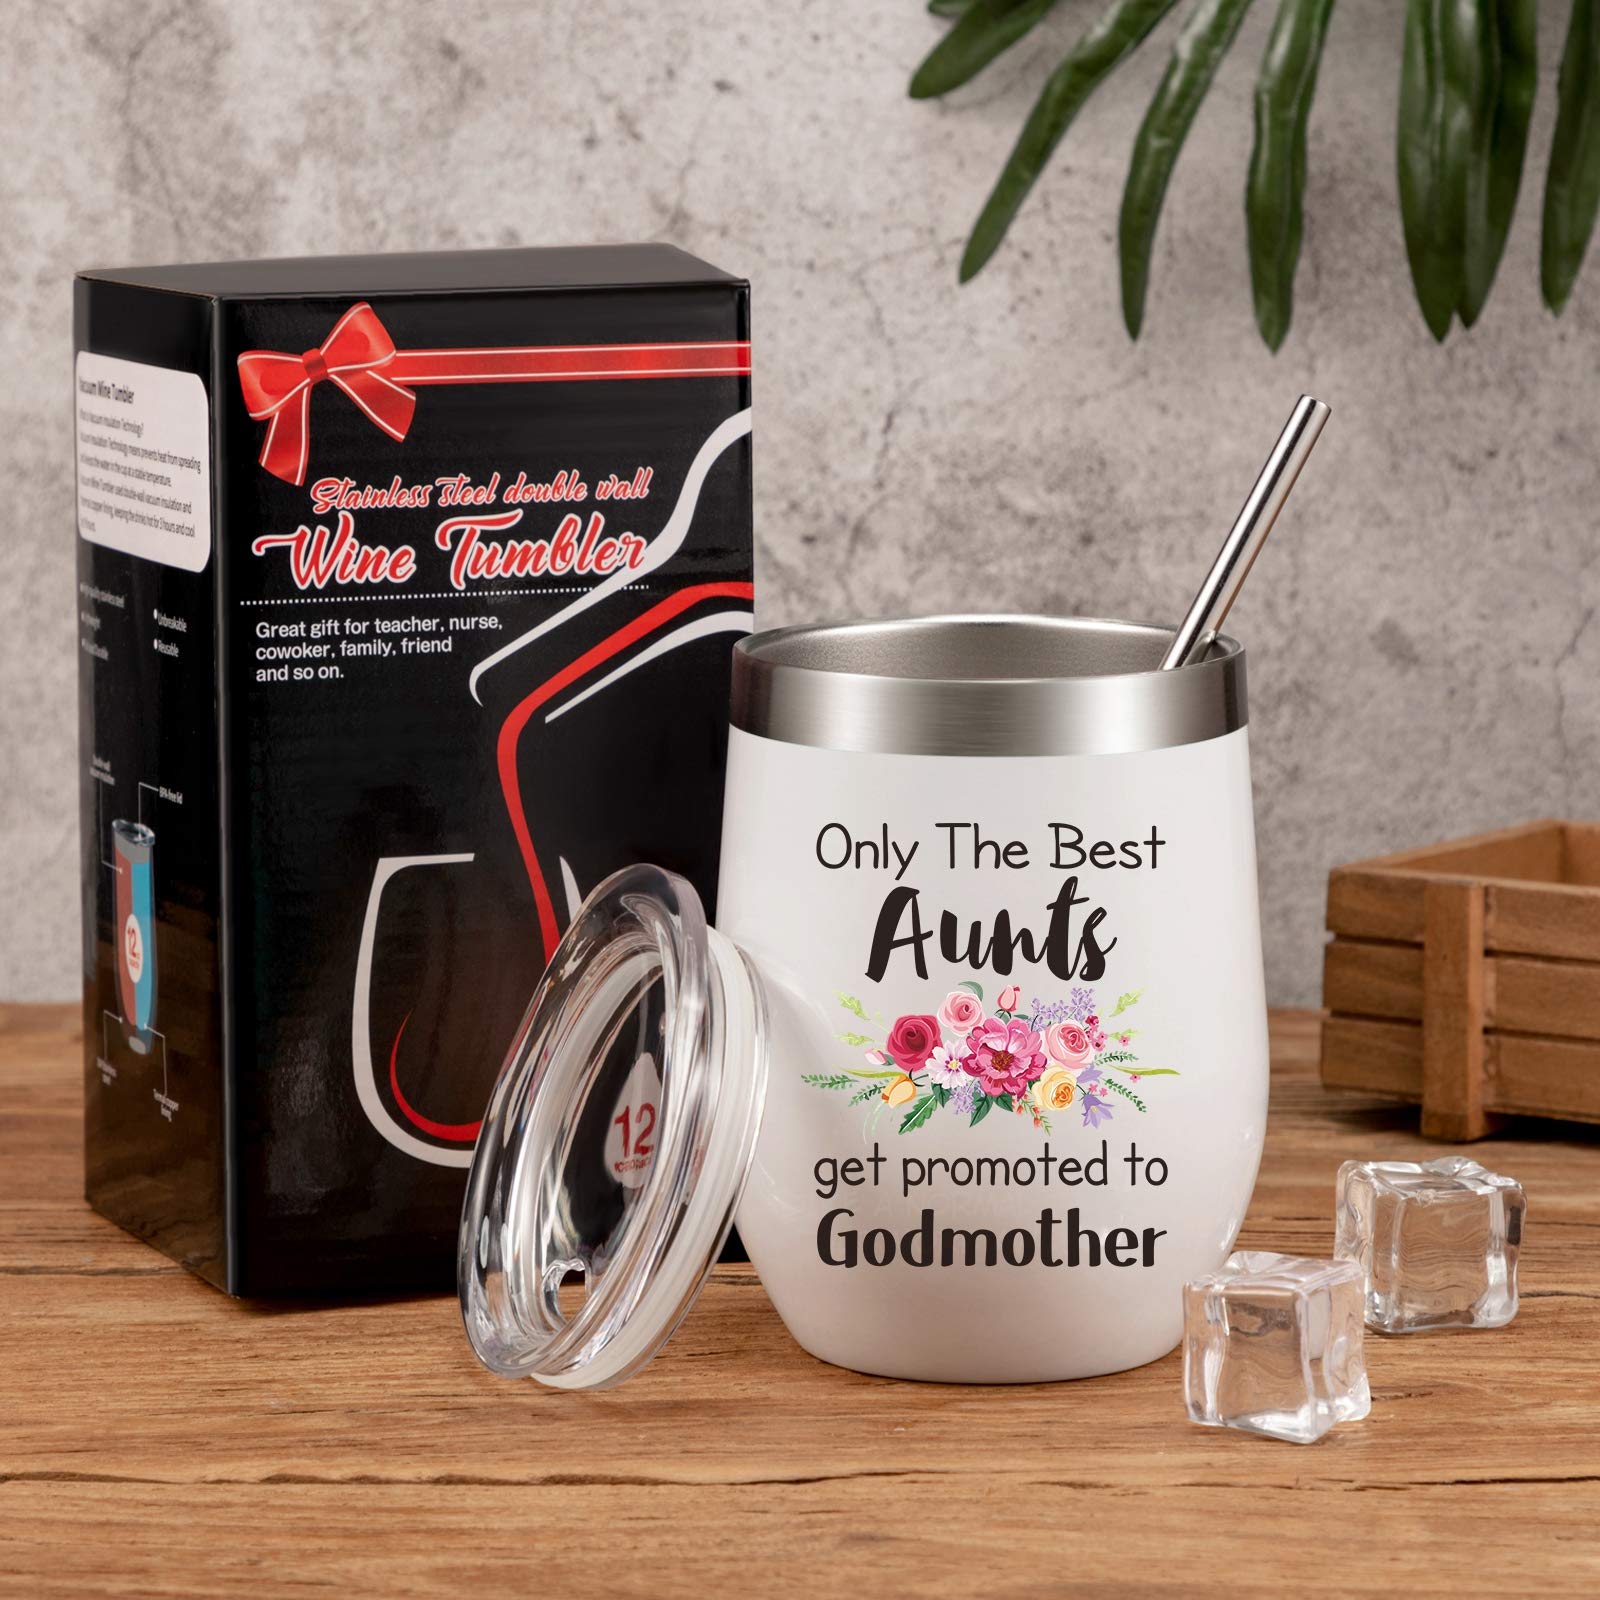 Only The Best Aunts Get Promoted To Godmother Coffee Mug, Aunt Godmother Gift for Mother's Day, Birthday, Christmas,Thanksgiving Day, 12 oz Wine Tumbler with Lid Straw and Brush